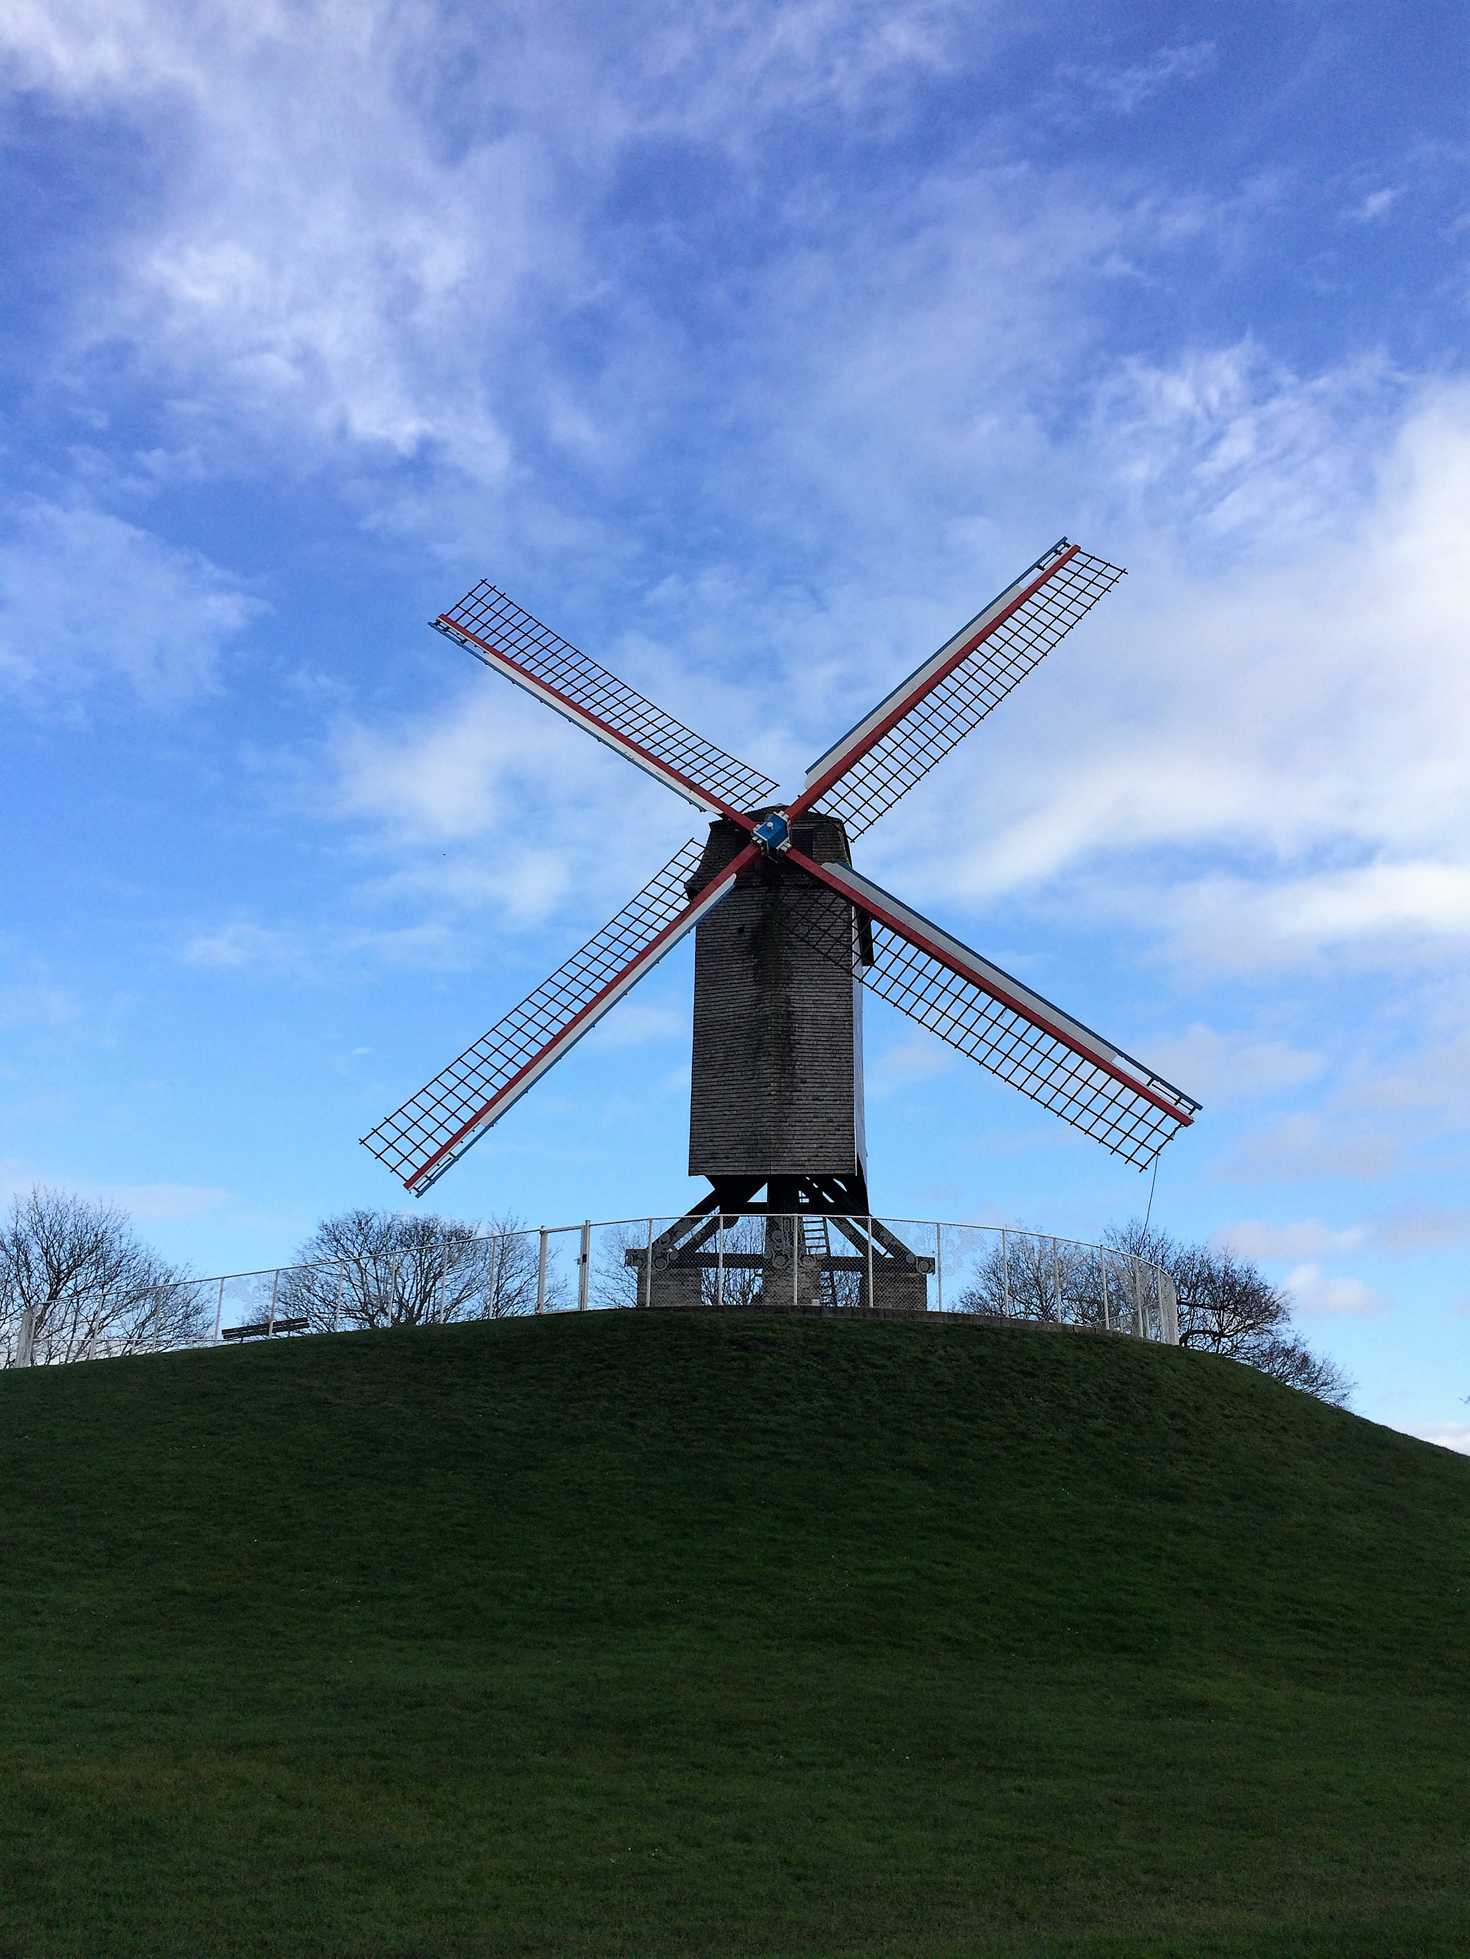 A picture of a windmill with a blue sky and green grass in Bruges, Belgium.